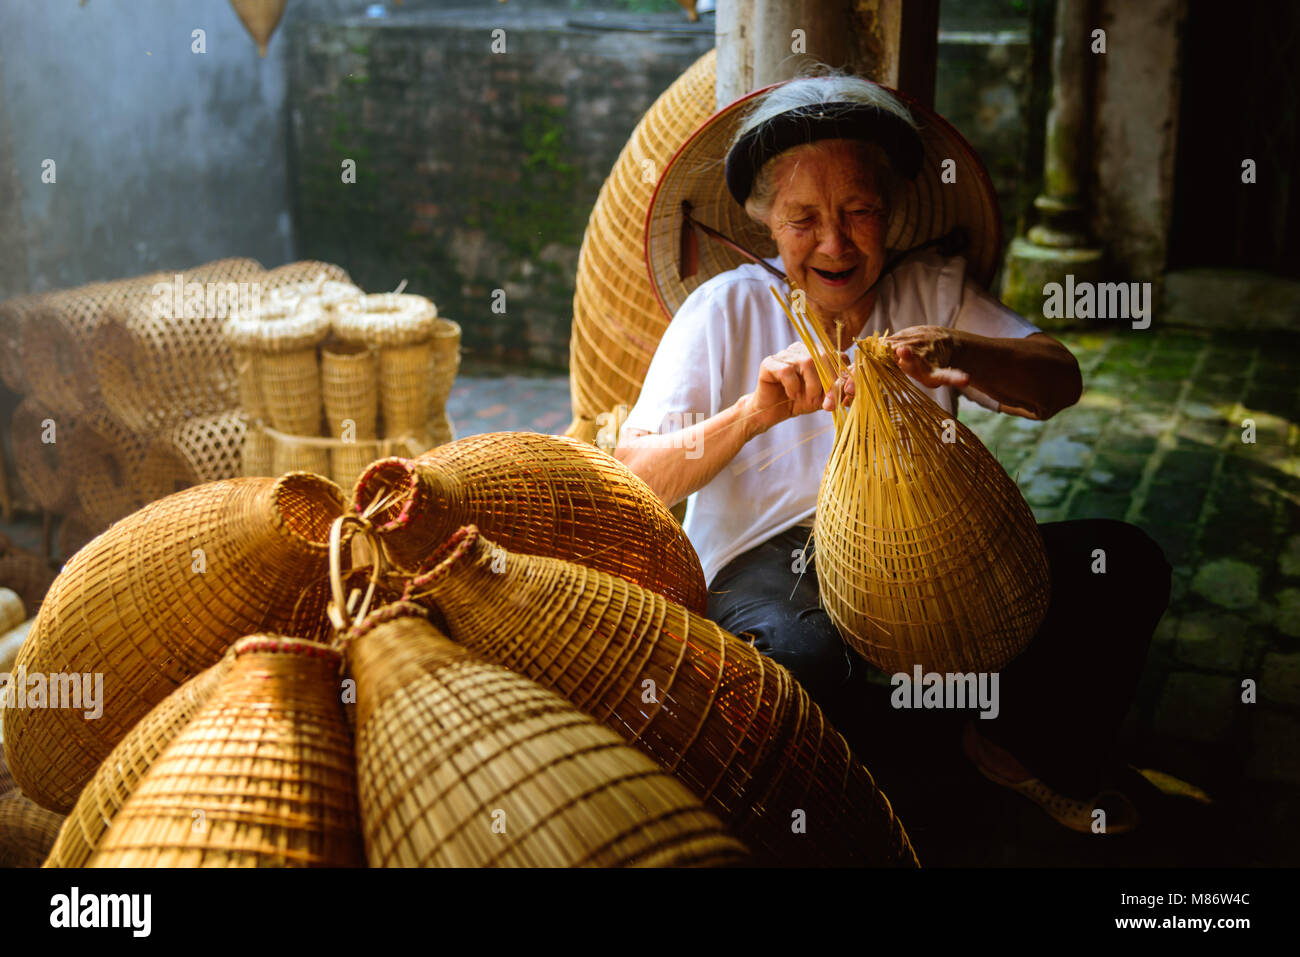 Vietnamese fishermen are doing basketry for fishing equipment at morning in Thu Sy Village, Vietnam. Stock Photo